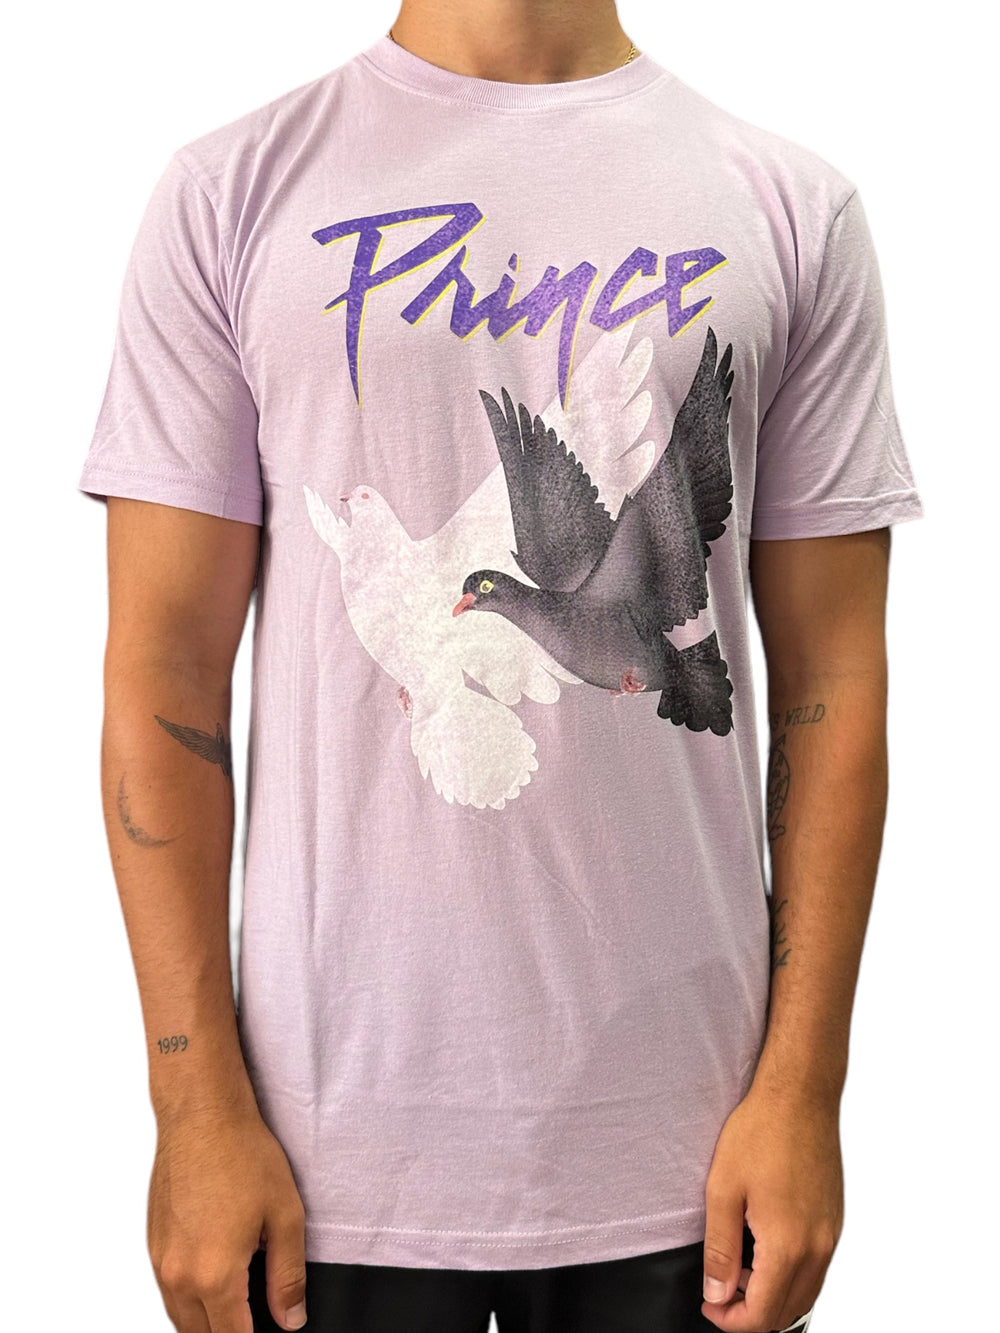 Prince – Doves Distressed Print Purple Rain Official Unisex T Shirt Various Sizes NEW